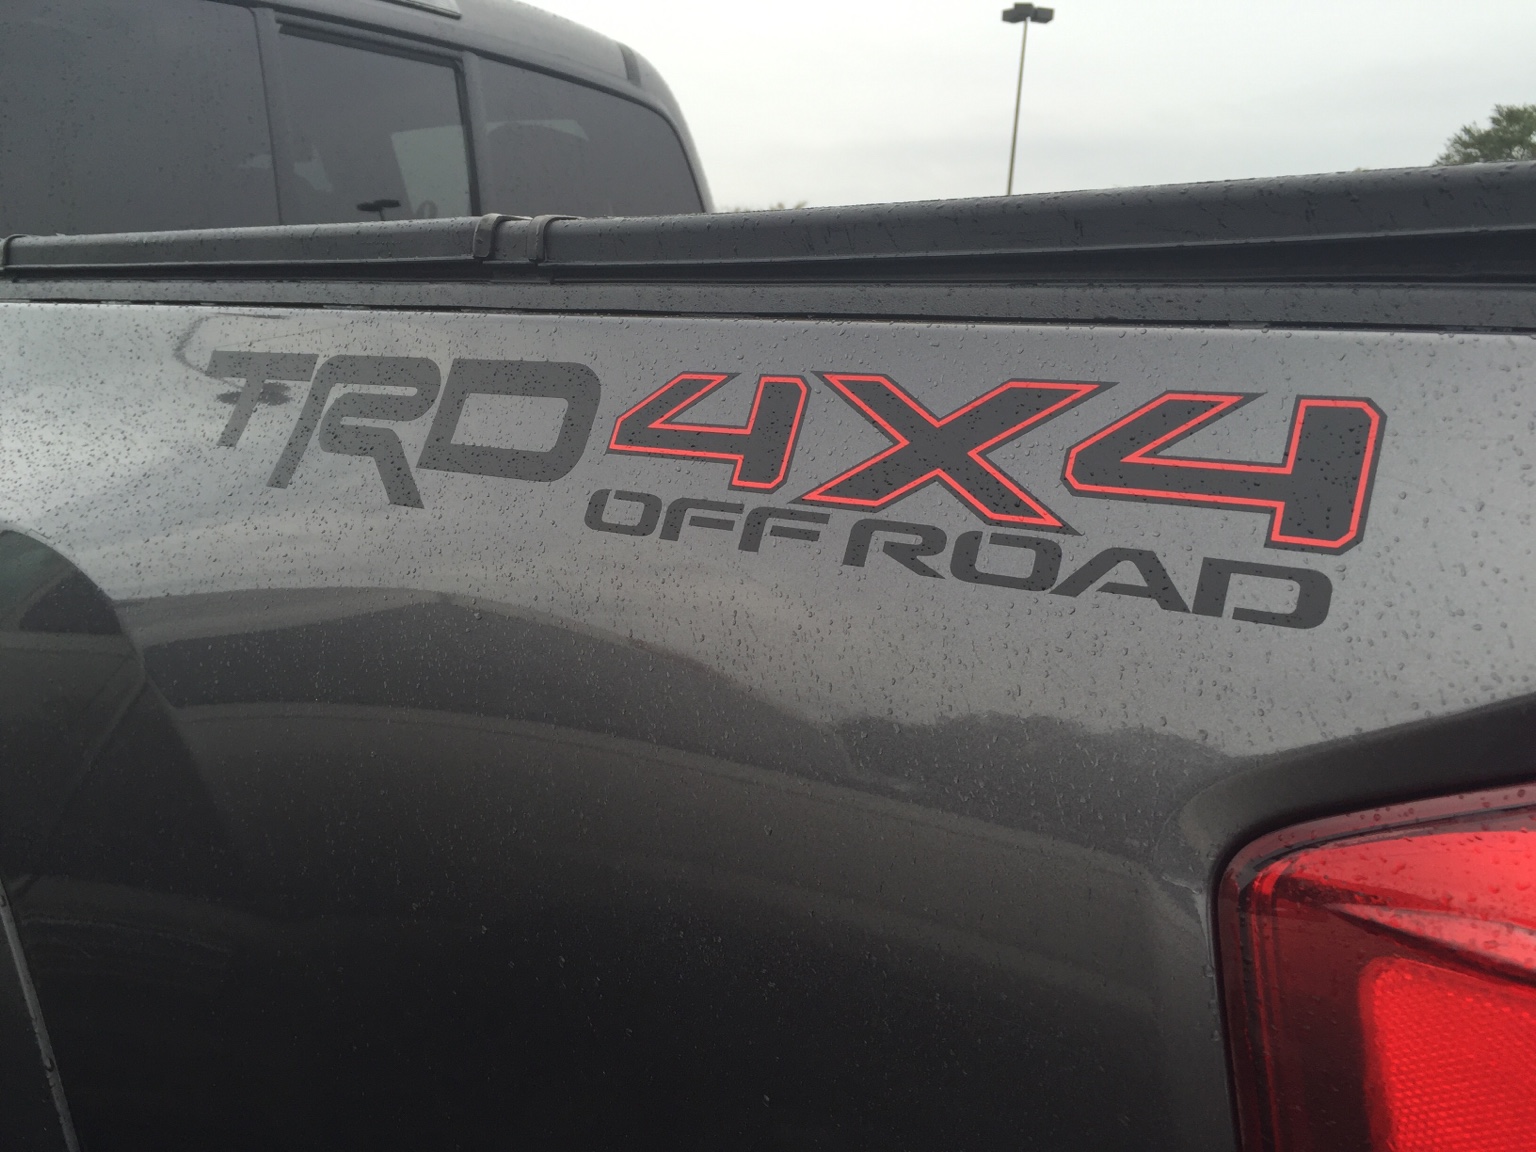 TRD Truck Off Road 4x4 Toyota Racing Tacoma Decal